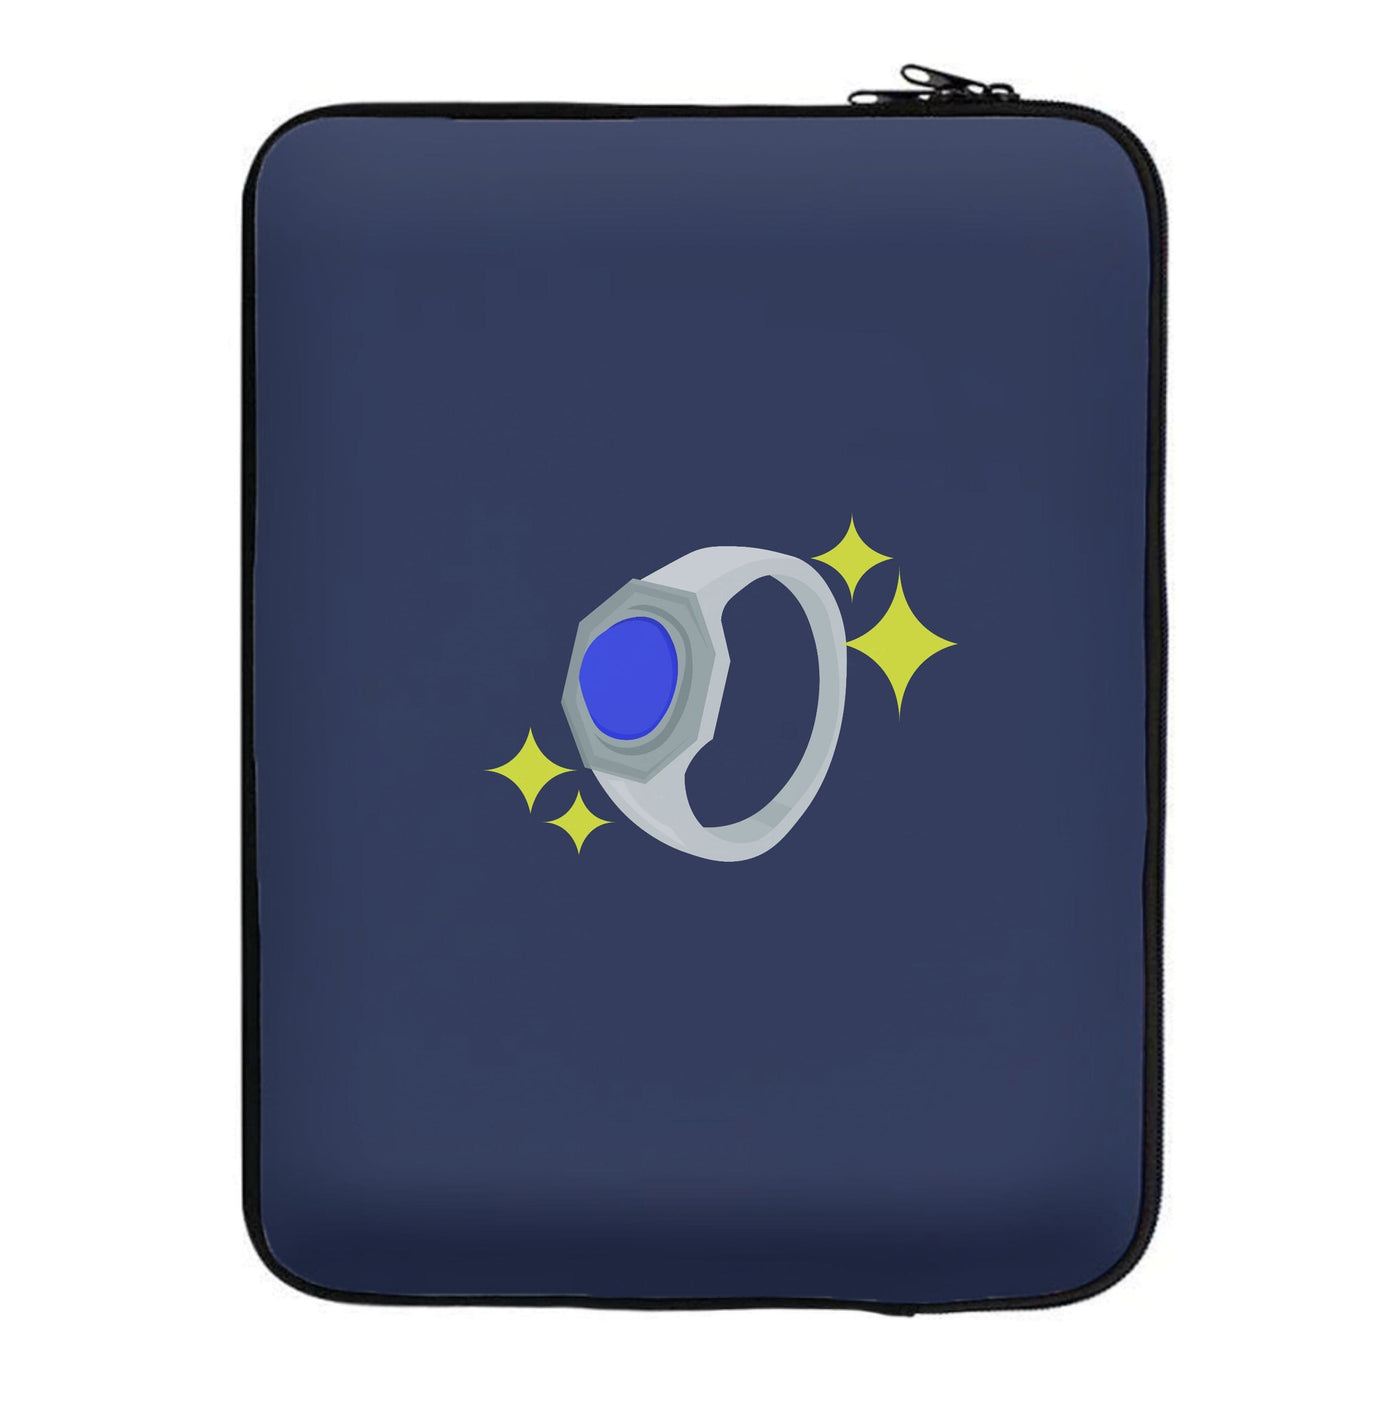 Klaus Mikaelson Ring - The Originals Laptop Sleeve